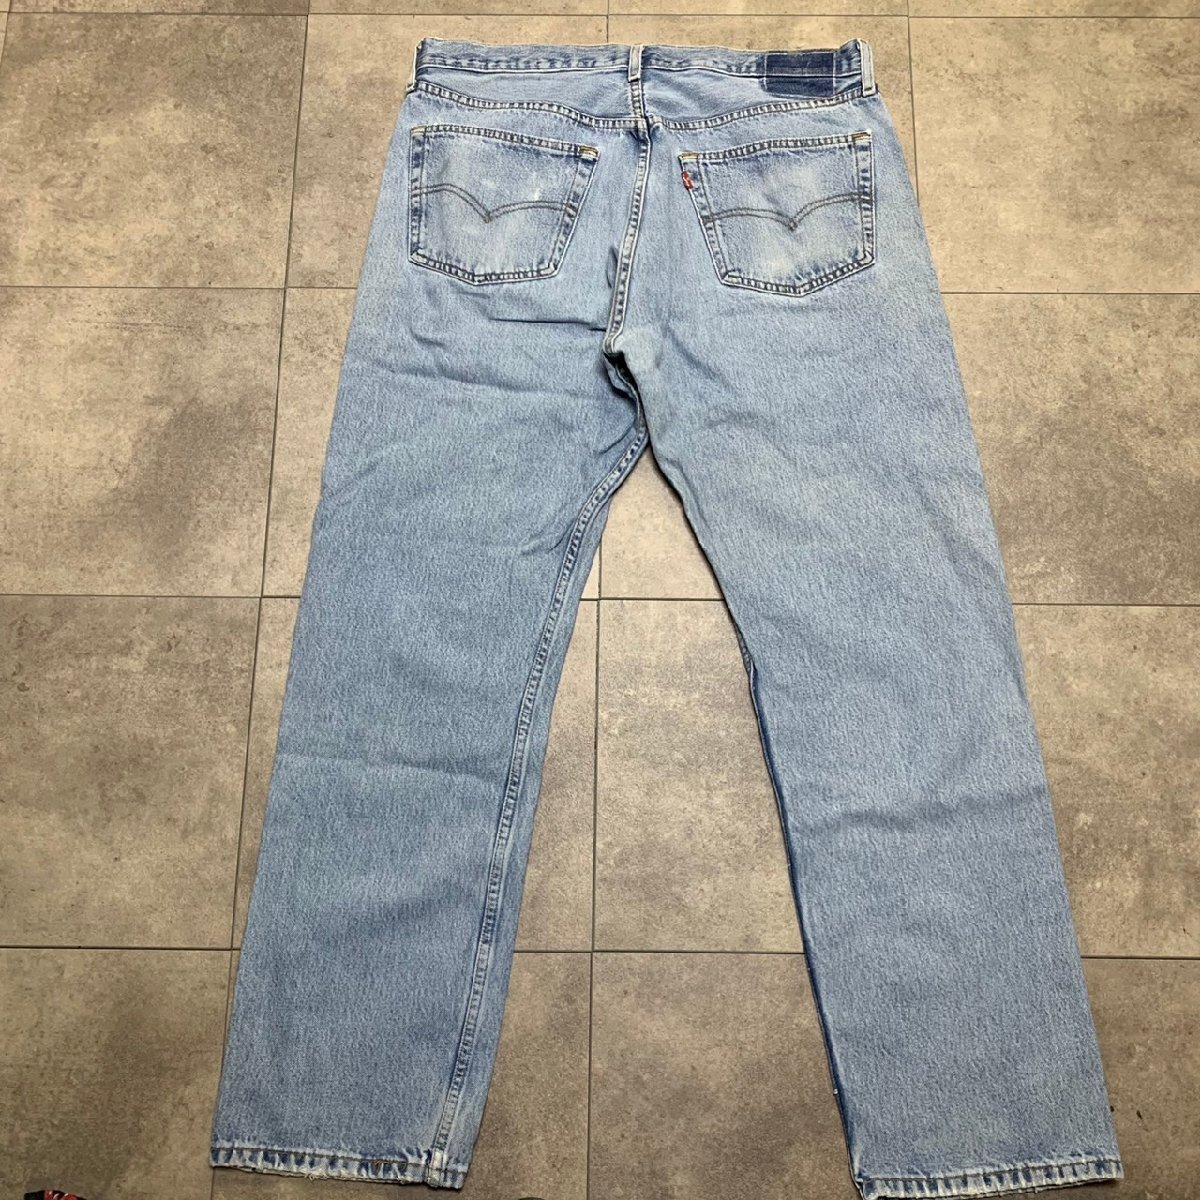 COLOMBIA製 00年代 Levi's 501 ビンテージ デニム 刻印689 MADE IN COLOMBIA 00s_画像2